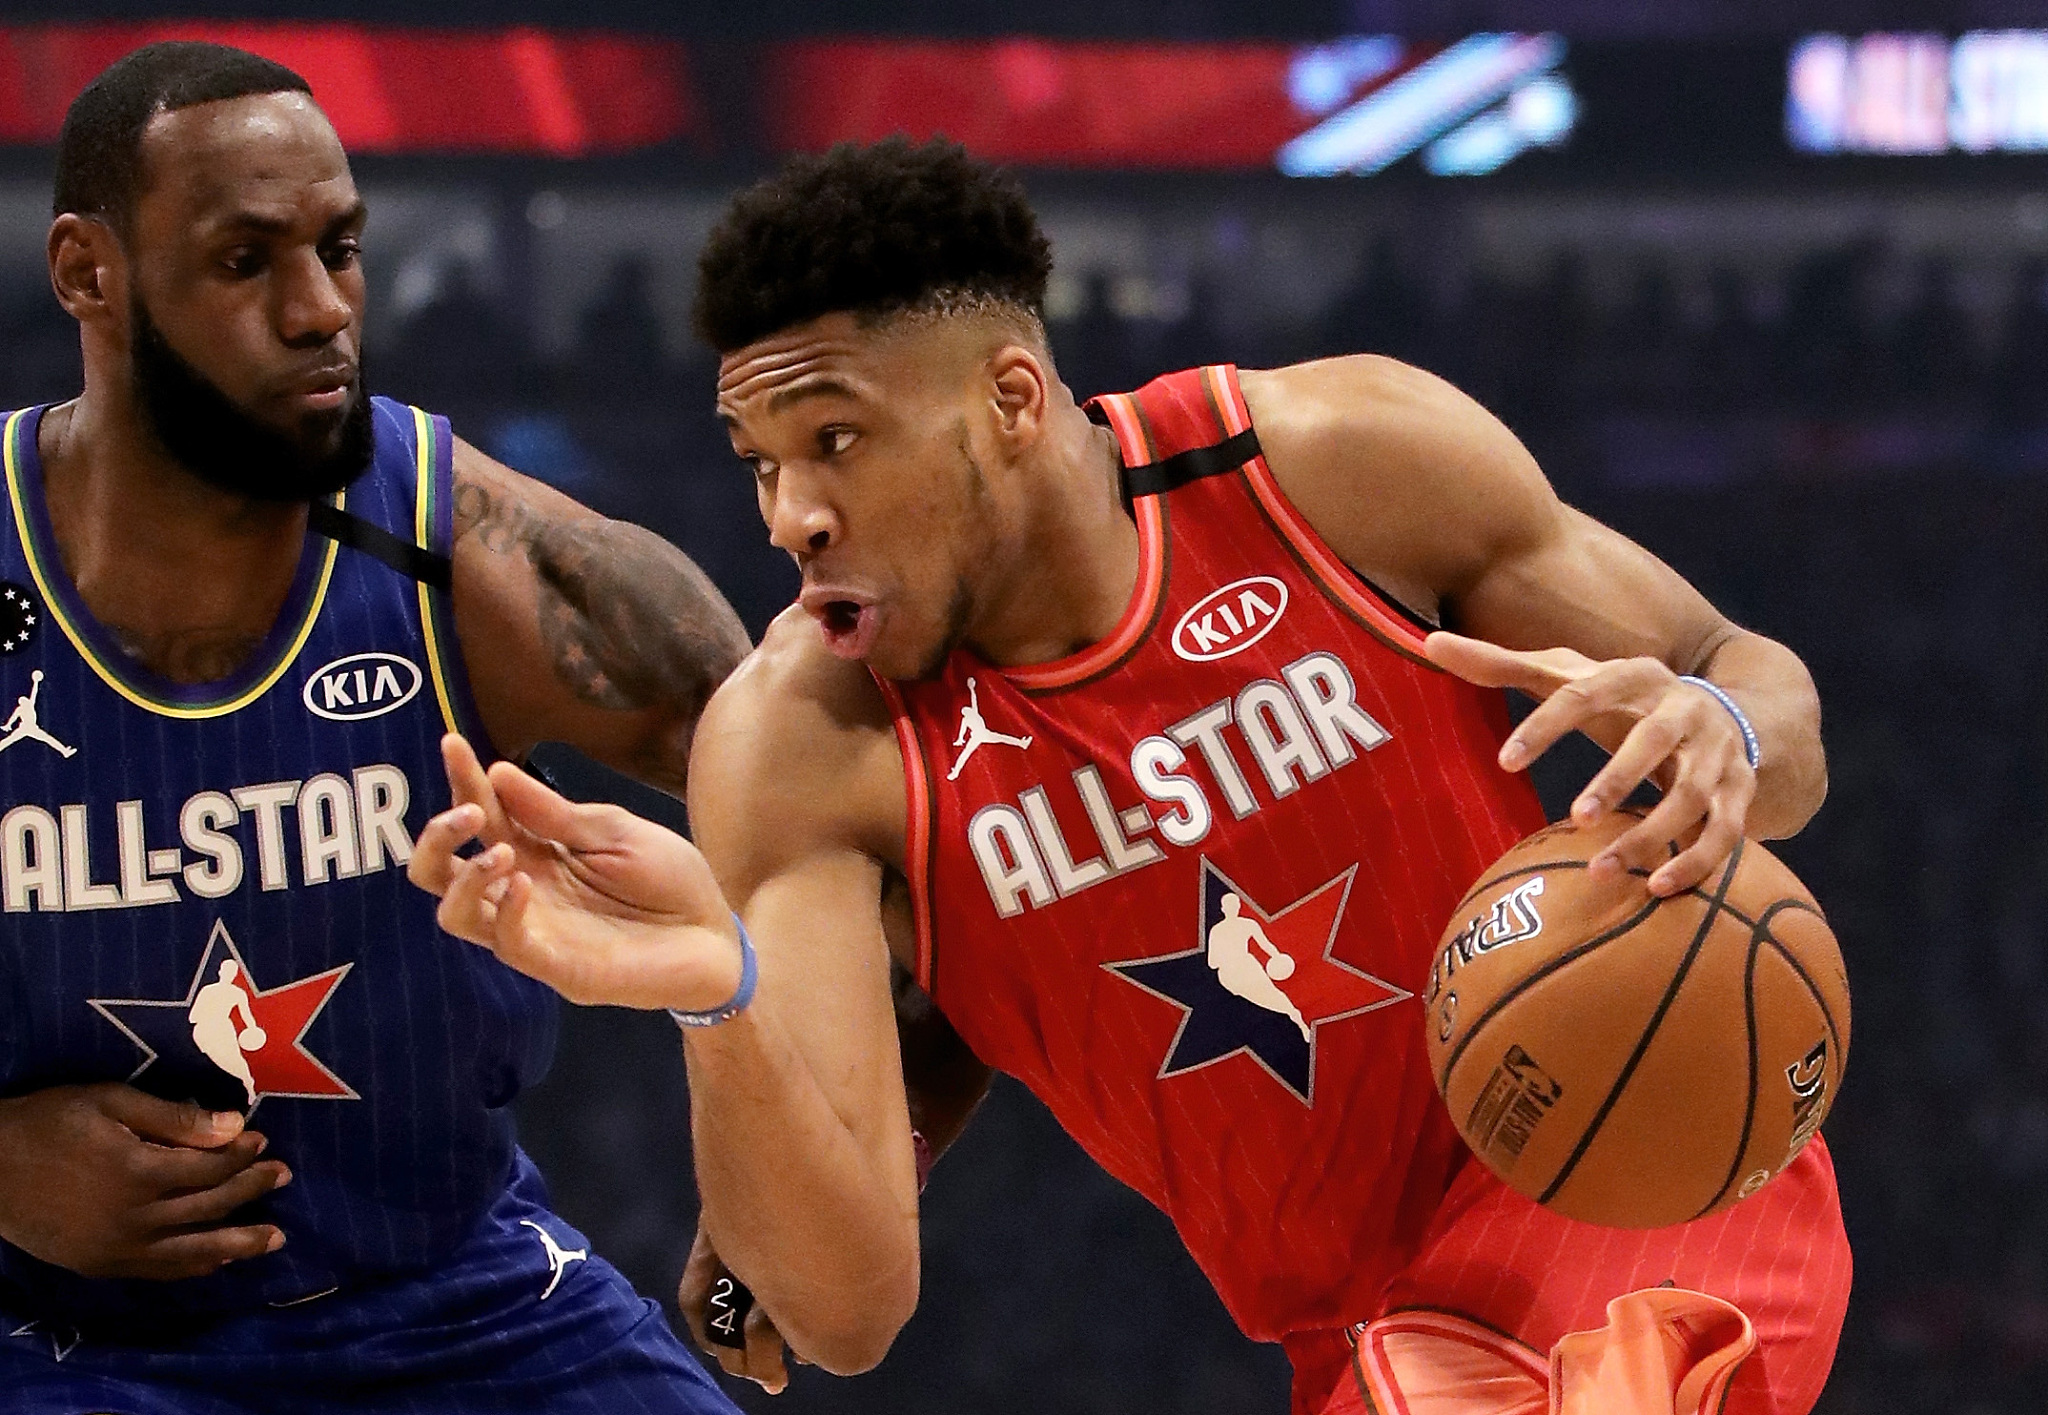 NBA: 2021 All-Star Game in limbo due to COVID-19 pandemic ...